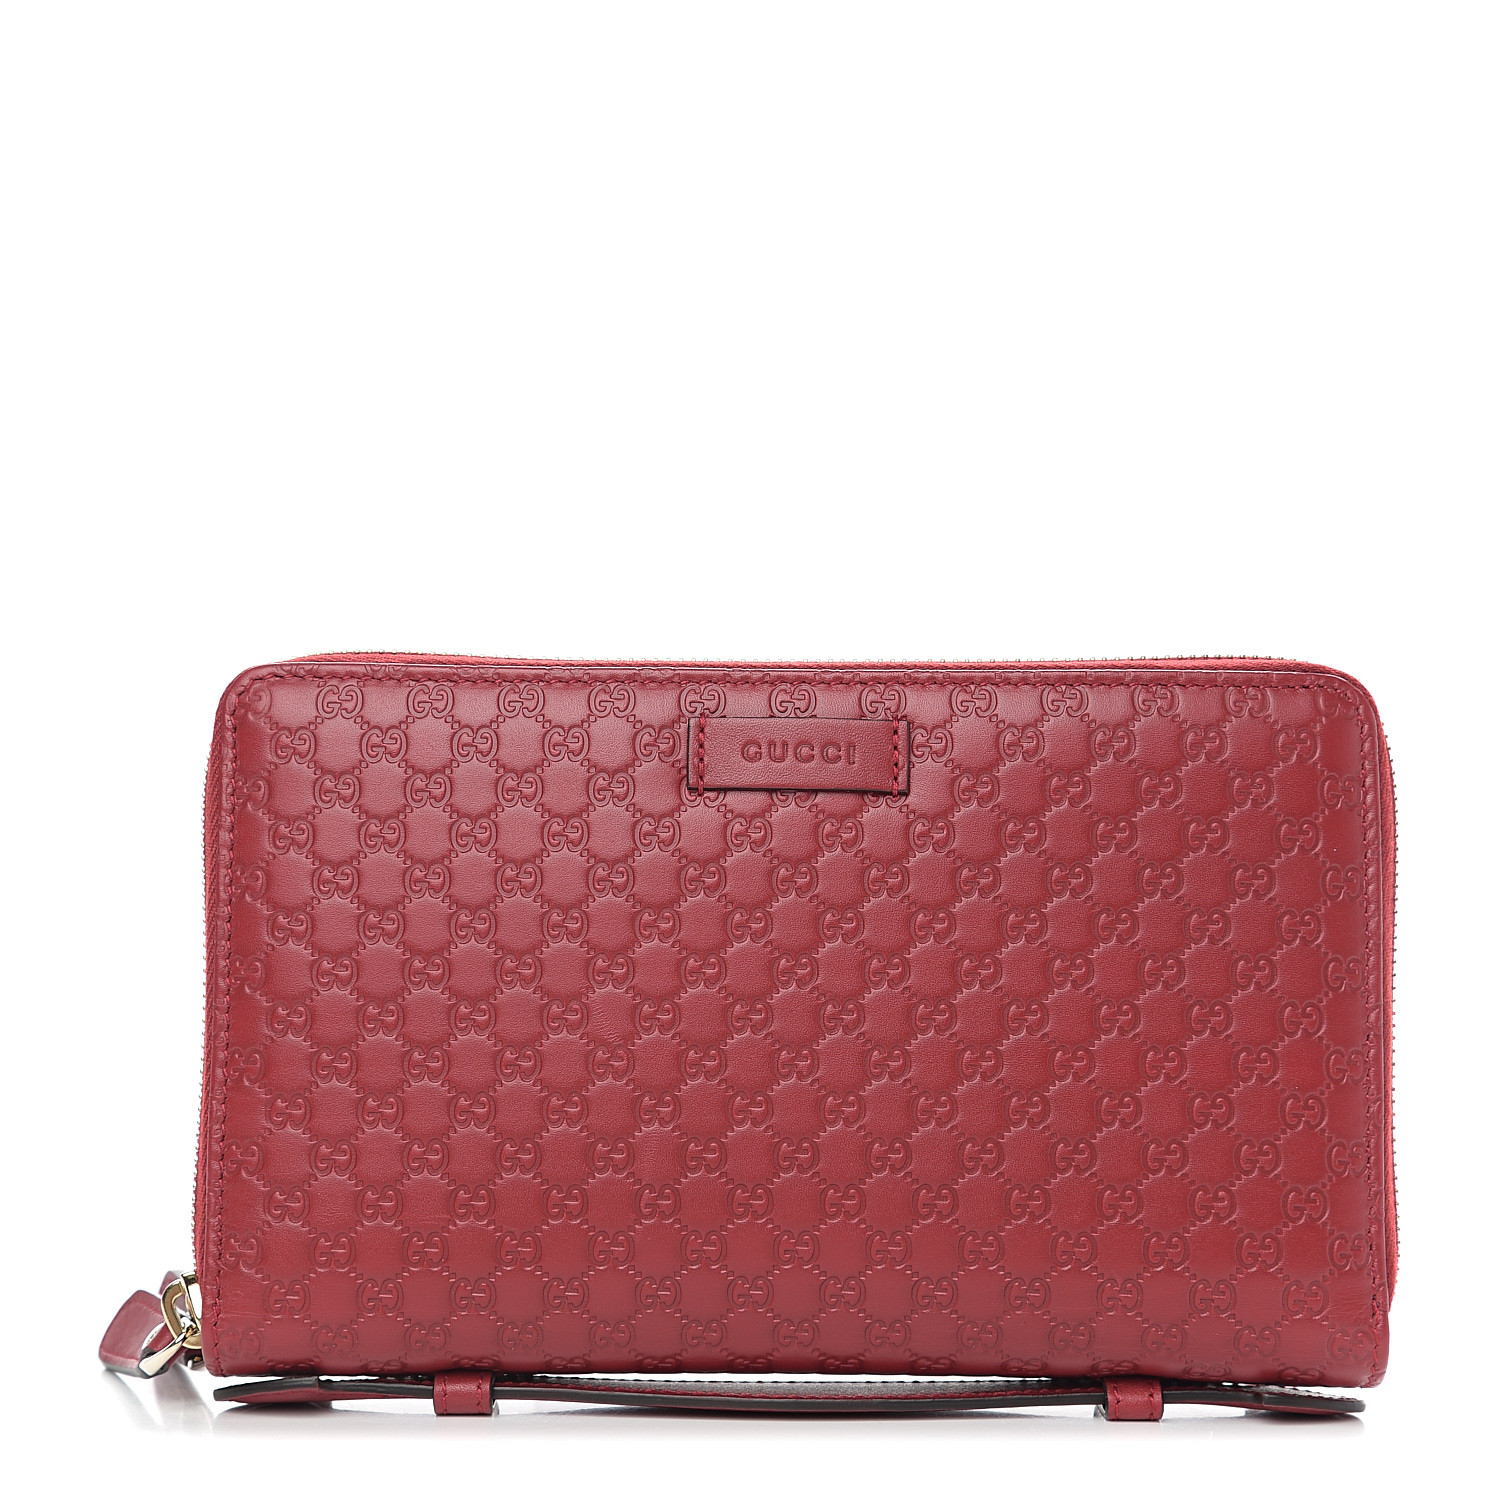 GUCCI Microguccissima Zip Around Top Handle Travel Wallet Red 566950